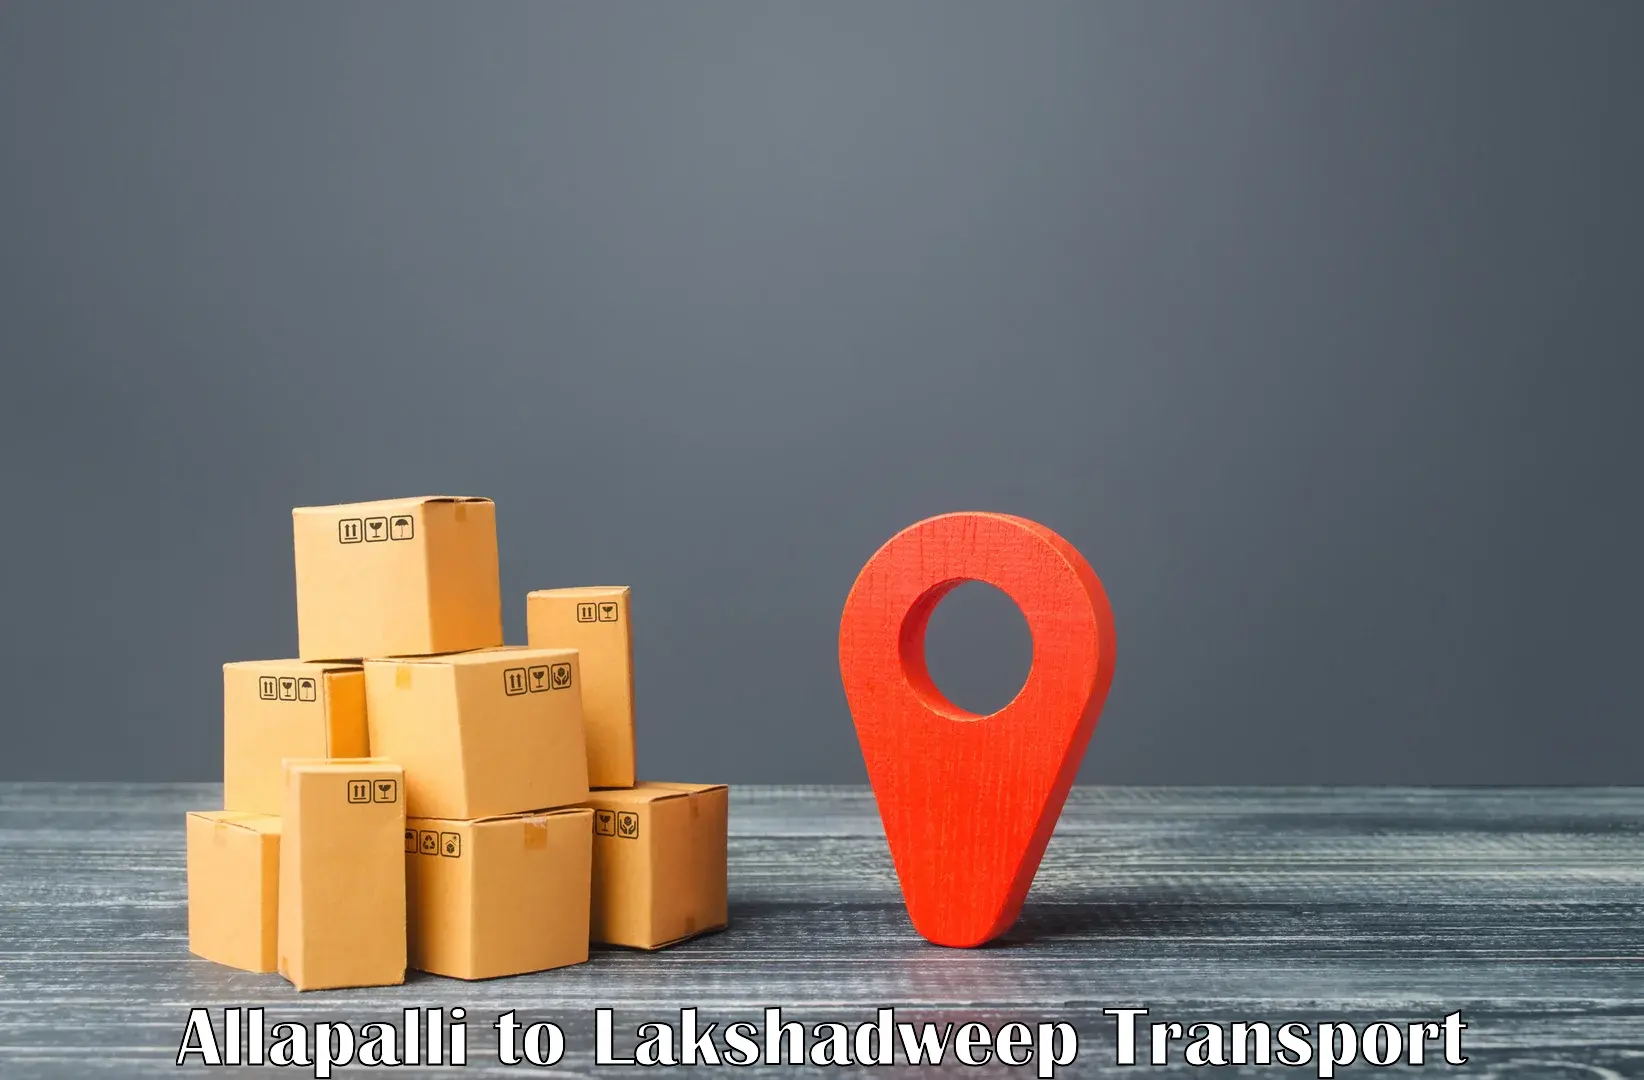 Cargo train transport services in Allapalli to Lakshadweep